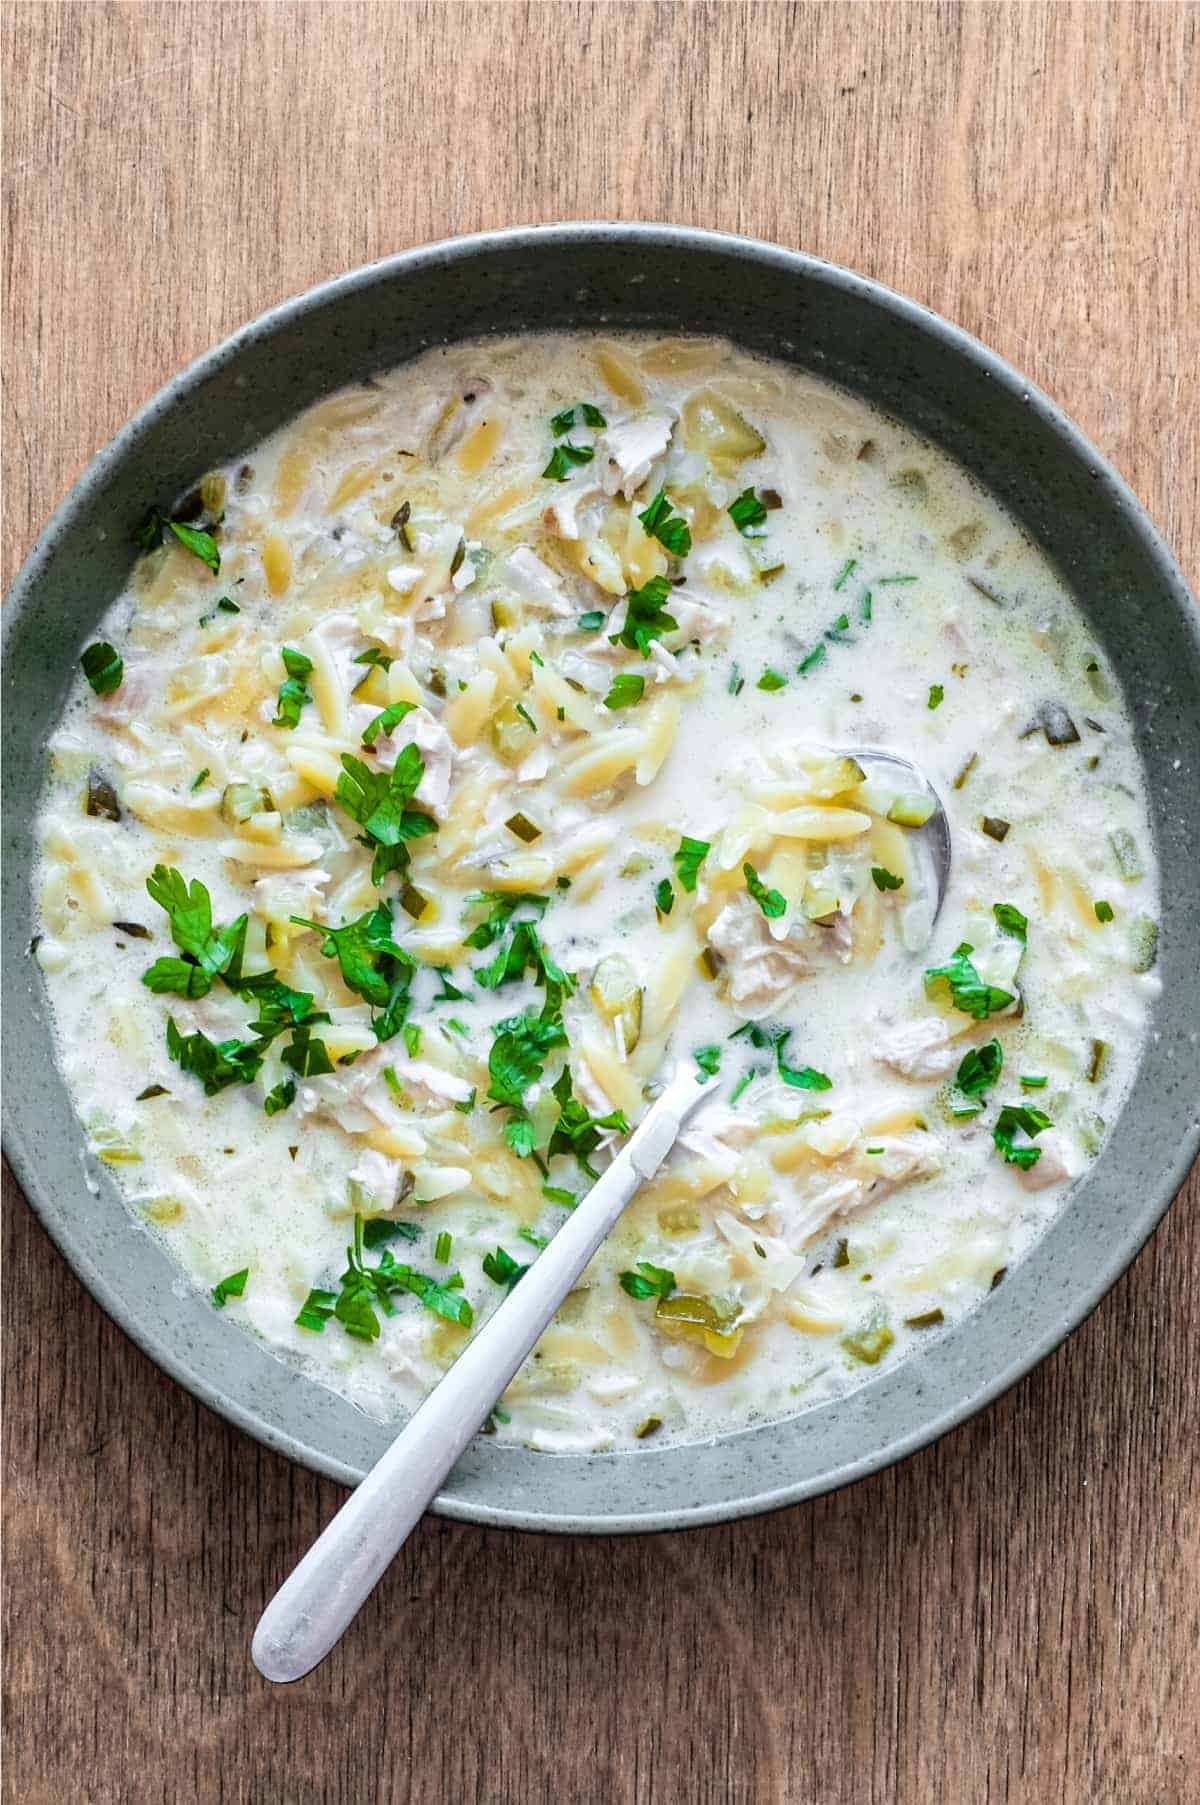 A bowl of Greek lemon orzo soup with chicken with a spoon